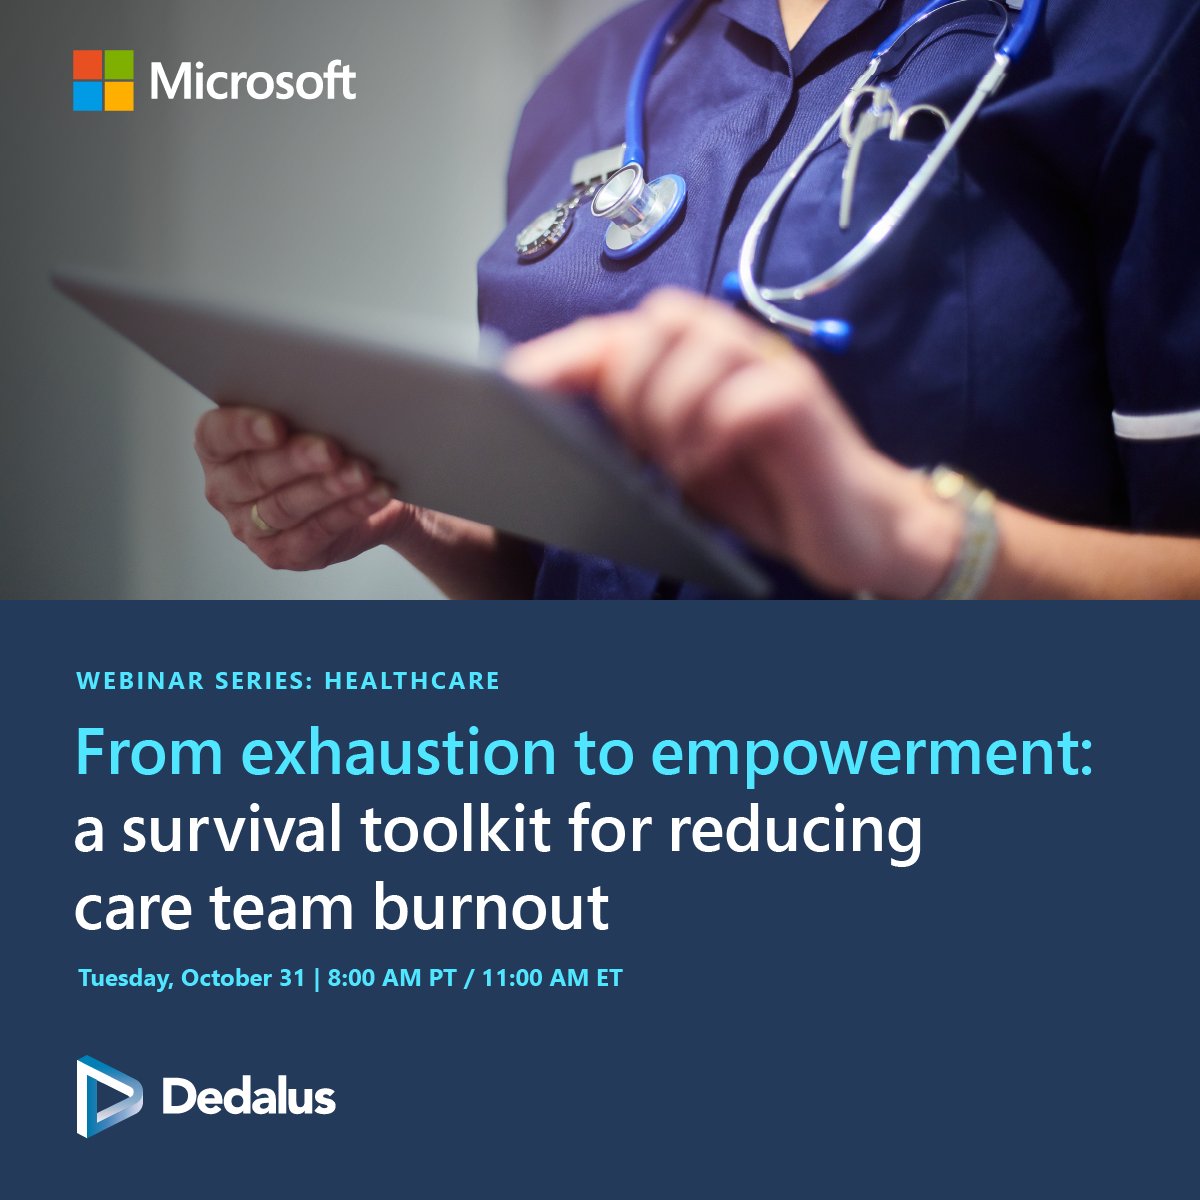 🚀 Ready to empower our healthcare heroes? Join our  𝑬𝒙𝒉𝒂𝒖𝒔𝒕𝒊𝒐𝒏 𝒕𝒐 𝑬𝒎𝒑𝒐𝒘𝒆𝒓𝒎𝒆𝒏𝒕 webinar on 10.31.23. Discover tech-driven solutions to reduce care team burnout with our survival toolkit. Register ➡️utm.guru/uf6cD 💪 #HealthTech #frontlineworker